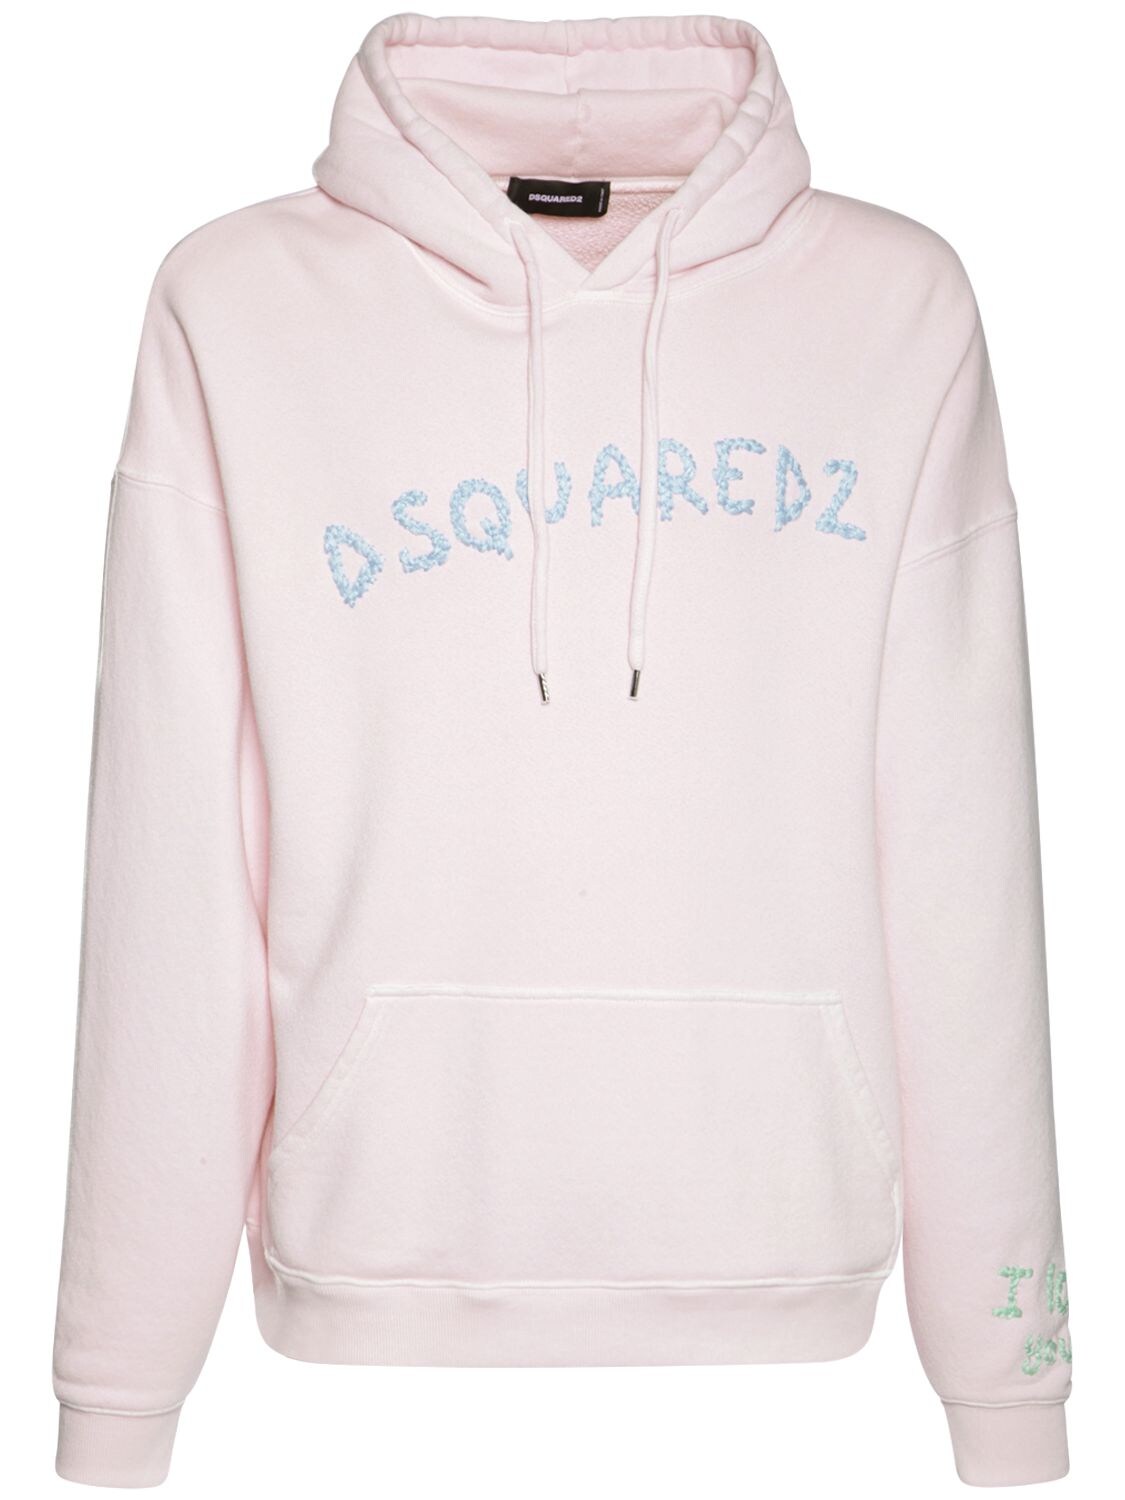 DSQUARED2 LOGO EMBROIDERED COTTON JERSEY HOODIE,75IG7E087-MJQY0